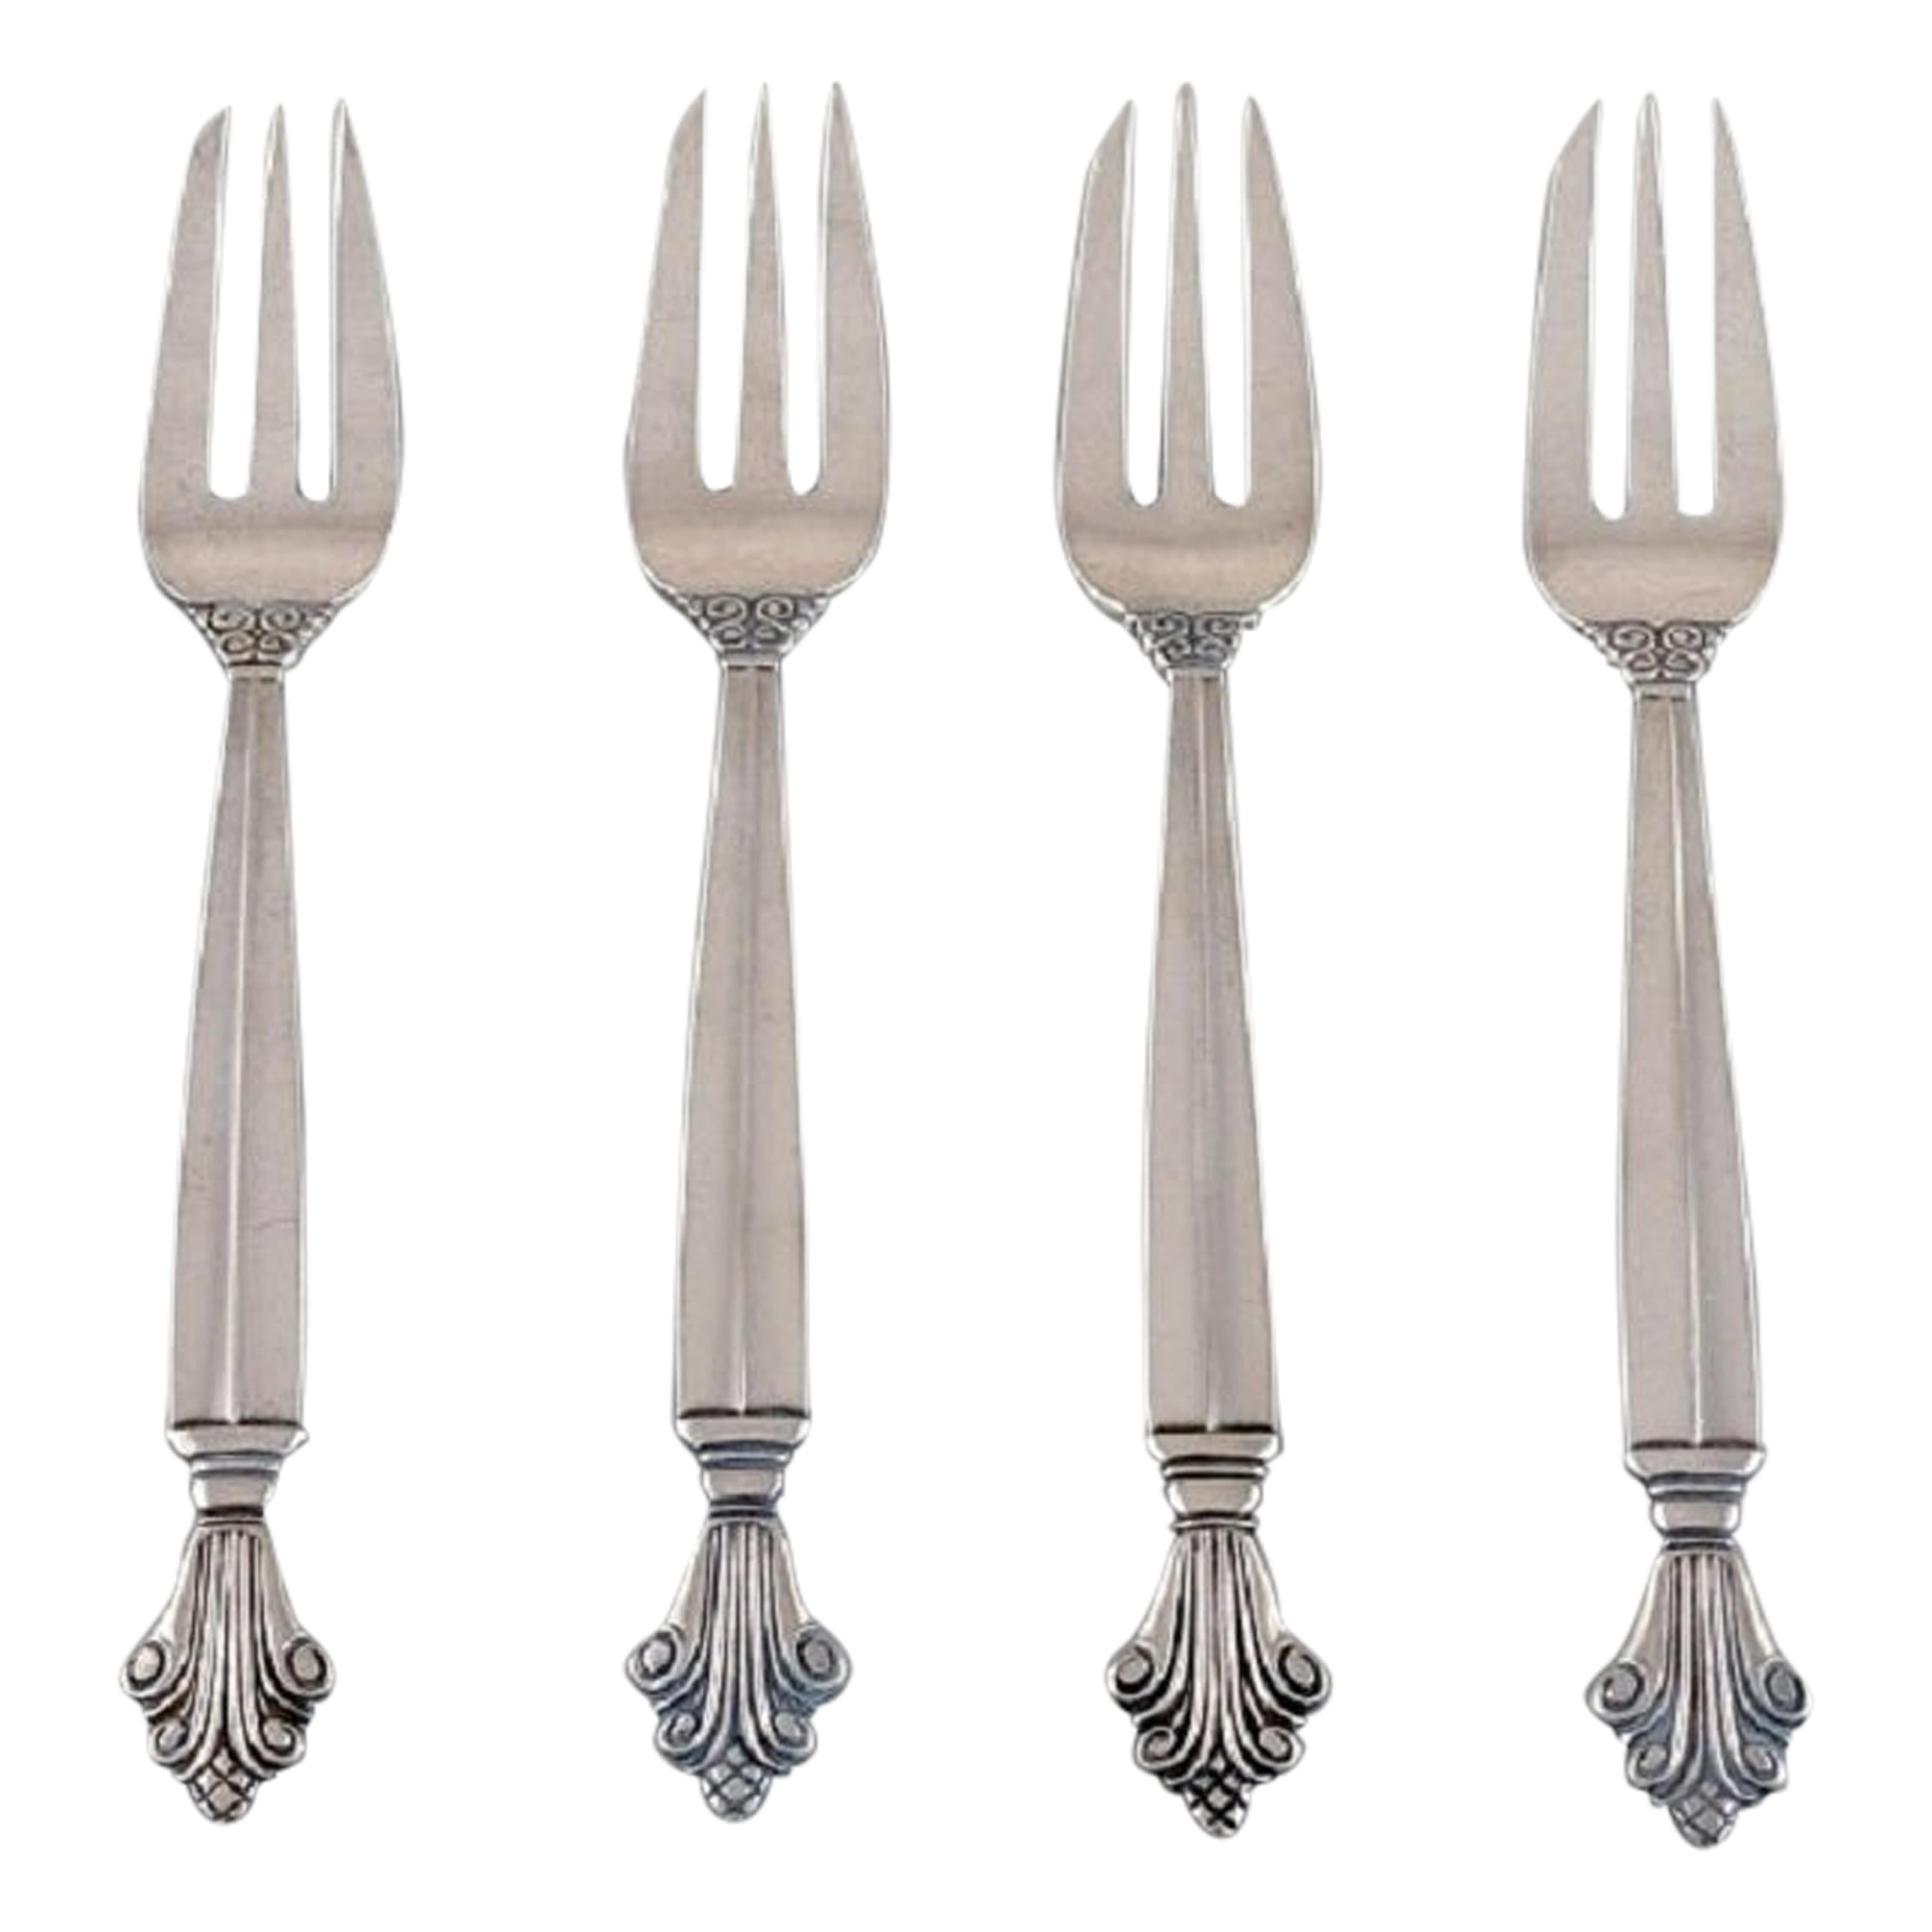 Four Georg Jensen Acanthus Pastry Forks in Sterling Silver, 1920s